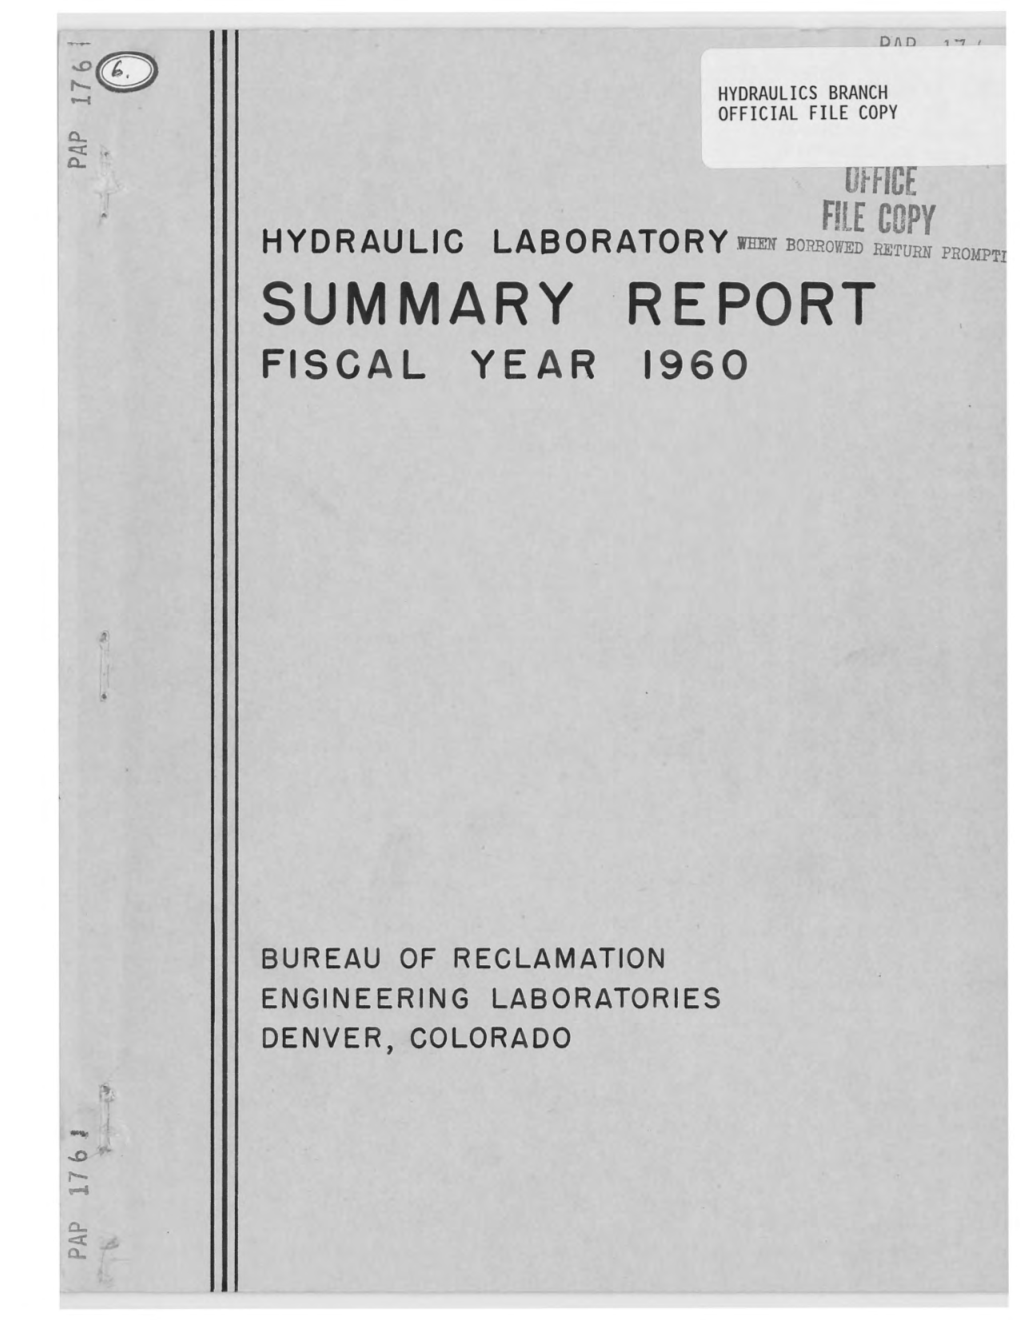 Summary ·Report Fiscal Year 1960